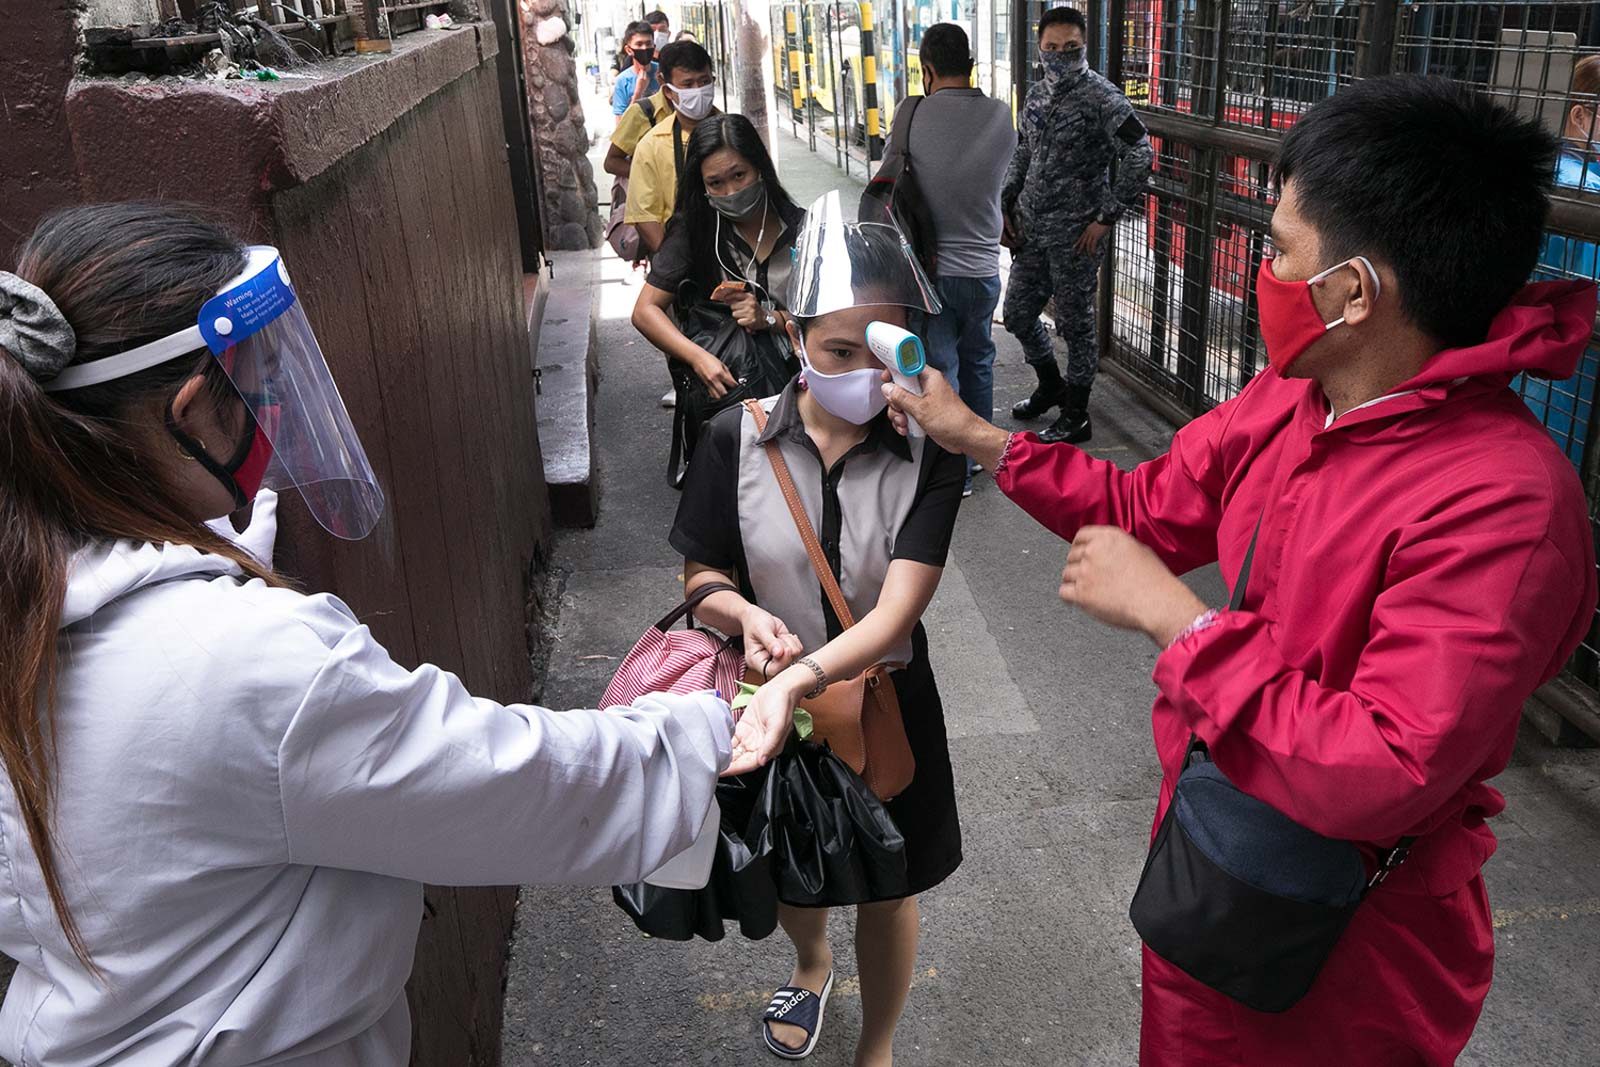 COMMUTING IN COVID-19 TIME. Bus passengers get their temperature checked before boarding. Photo by Darren Langit/Rappler 